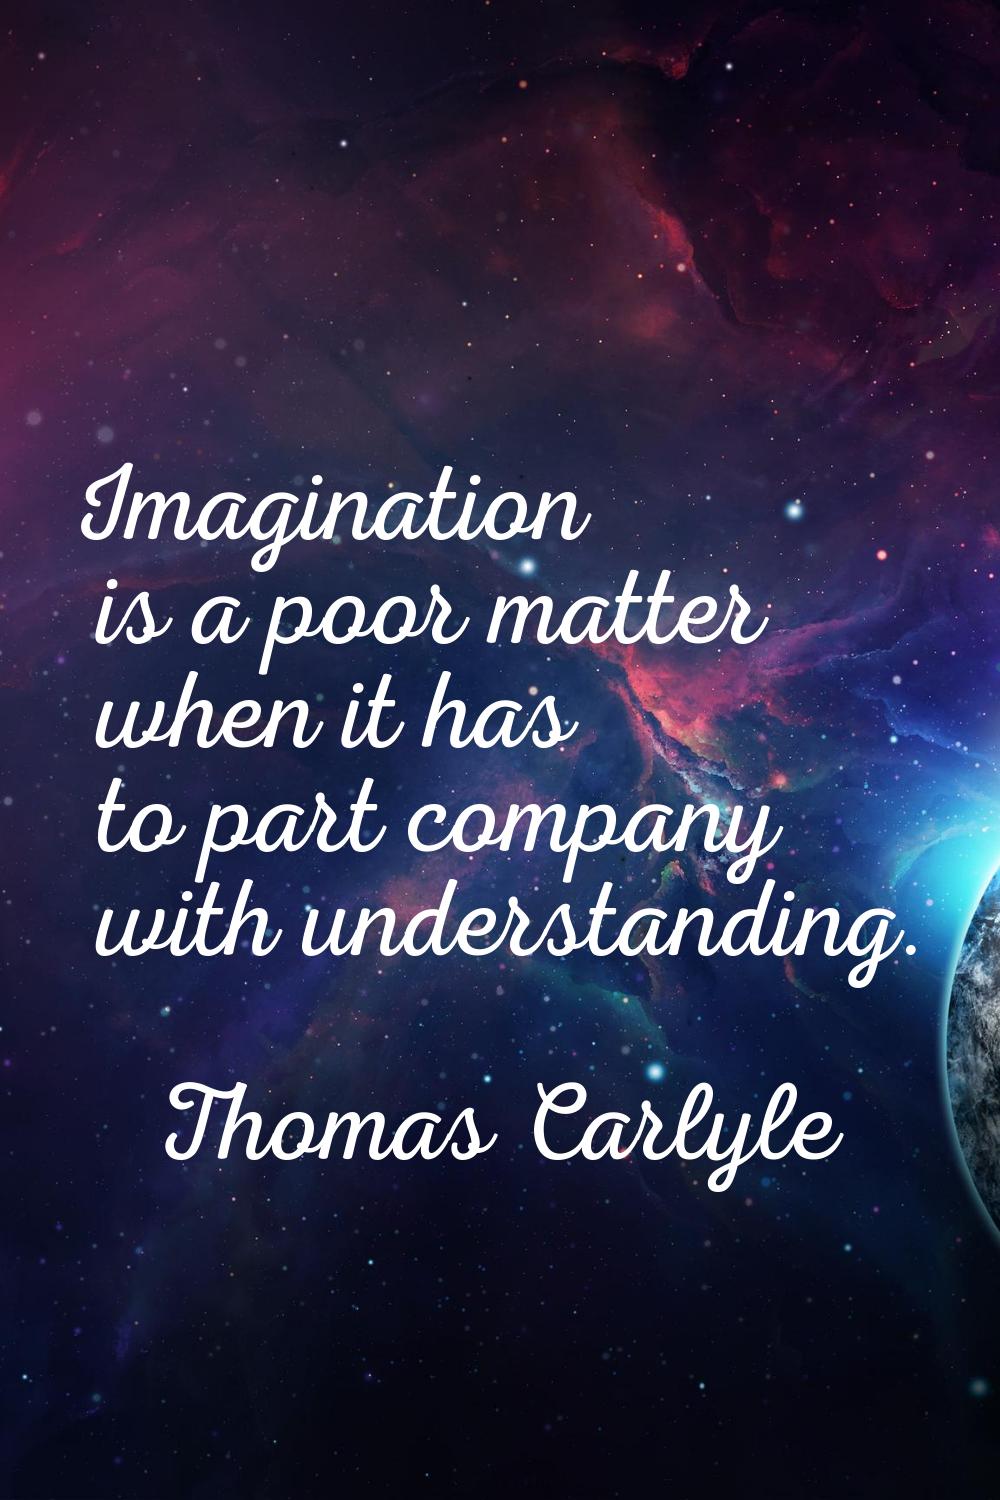 Imagination is a poor matter when it has to part company with understanding.